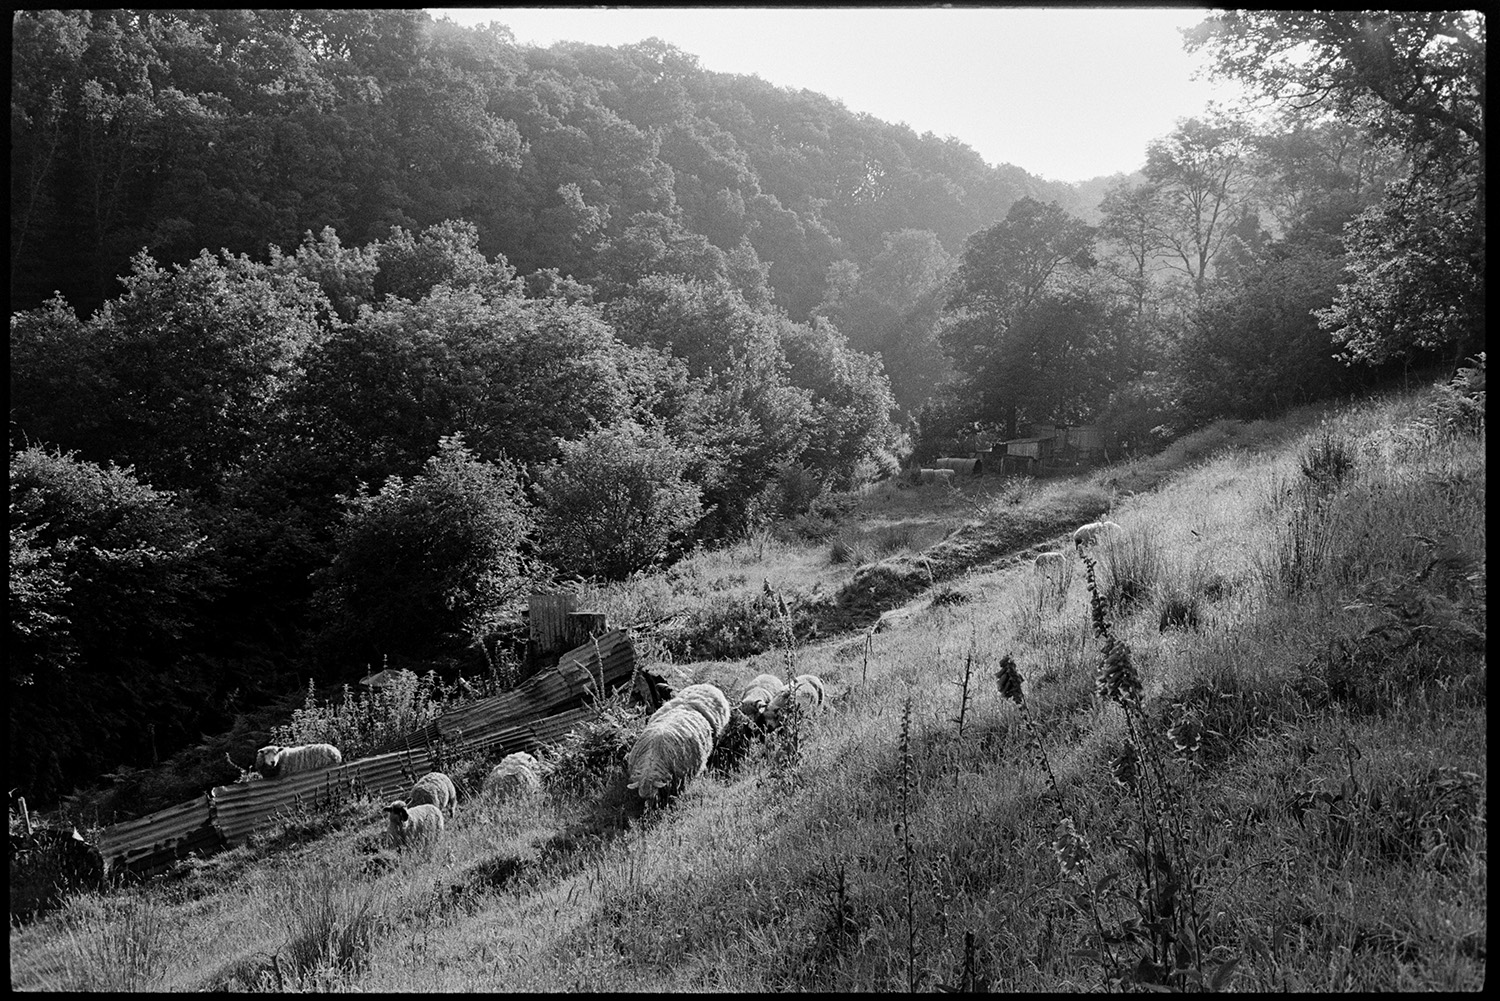 Lost sheep in sunlit lane with tall hedges, early morning moving into field. 
[Archie Parkhouse's sheep grazing on a hillside by sheets of corrugated iron at Millhams, Dolton. Foxgloves are growing in the field in the foreground and woodland is visible in the background.]